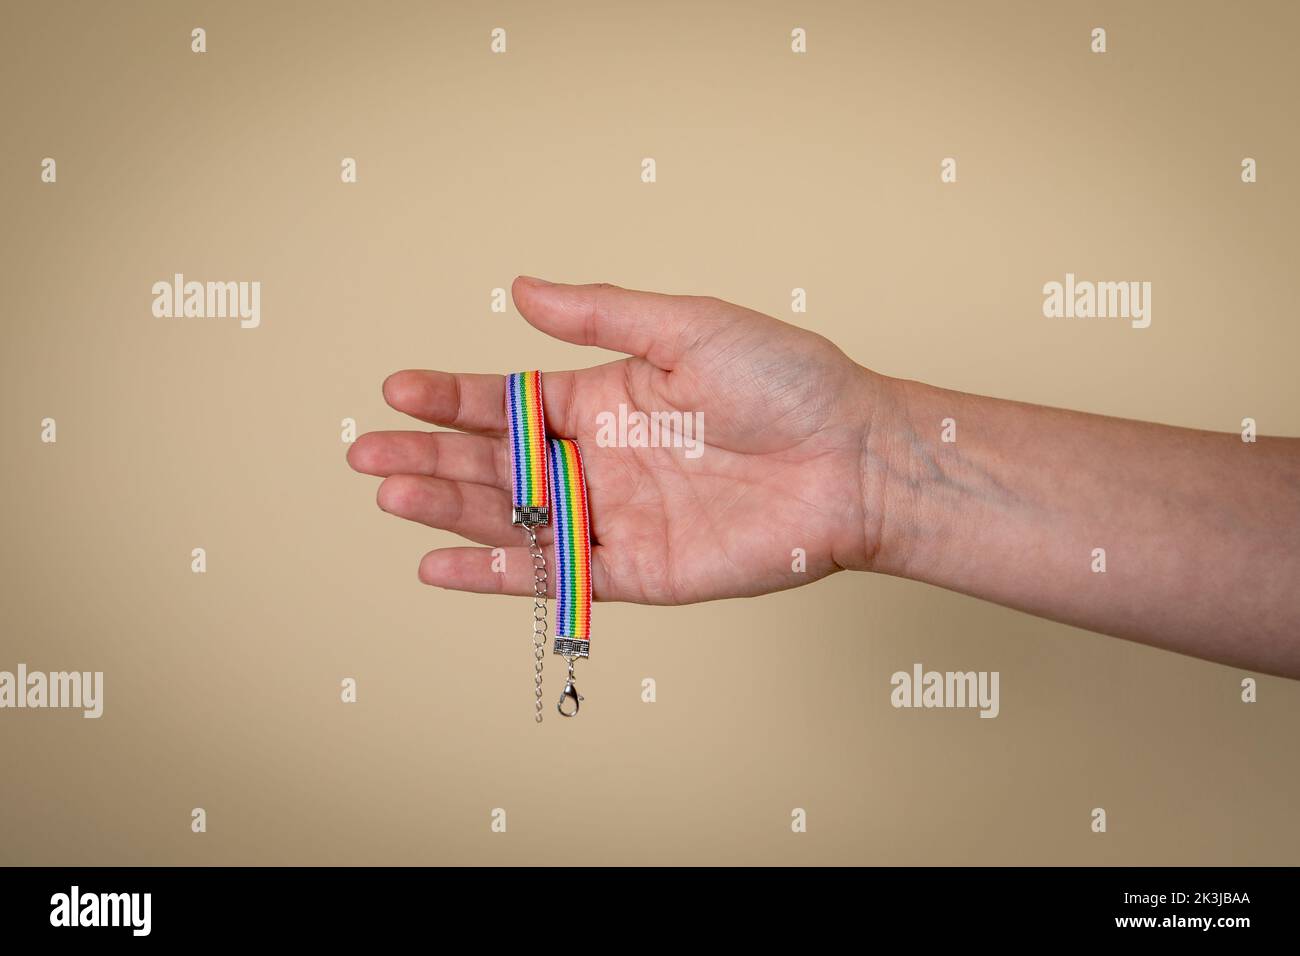 Colorful rainbow bracelet. Woman's hand and fingers. Stock Photo